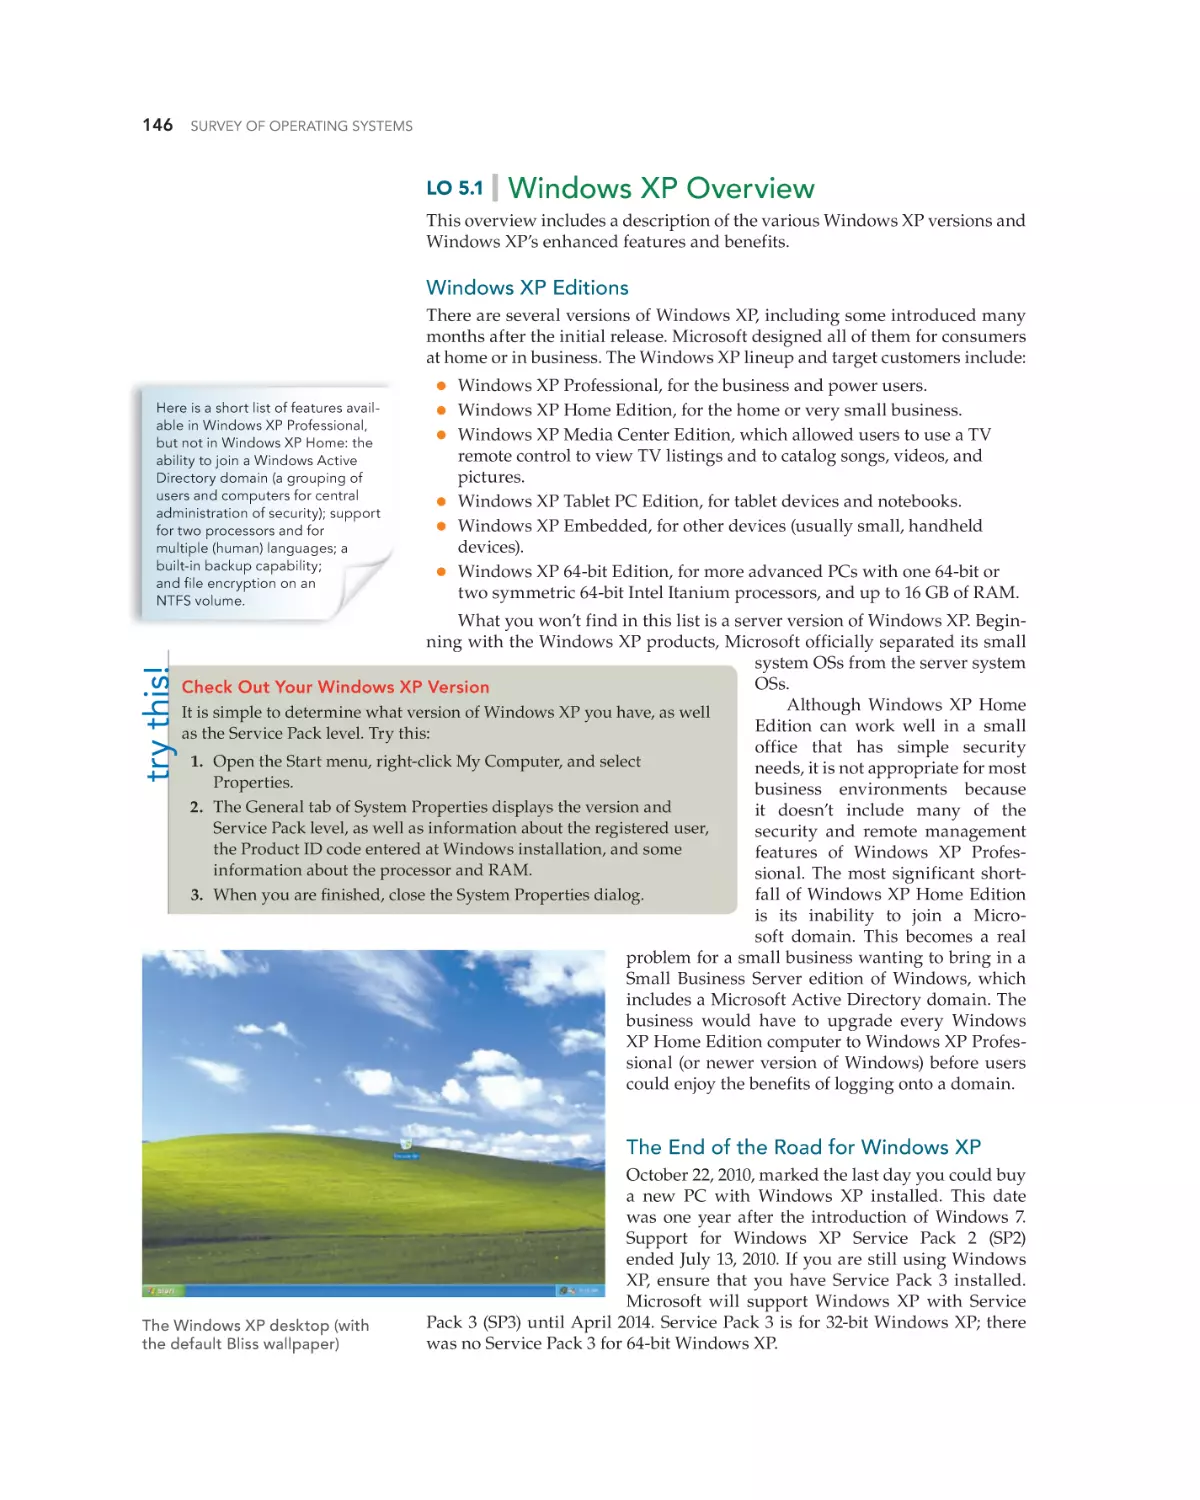 Windows XP Overview
Windows XP Editions
The End of the Road for Windows XP